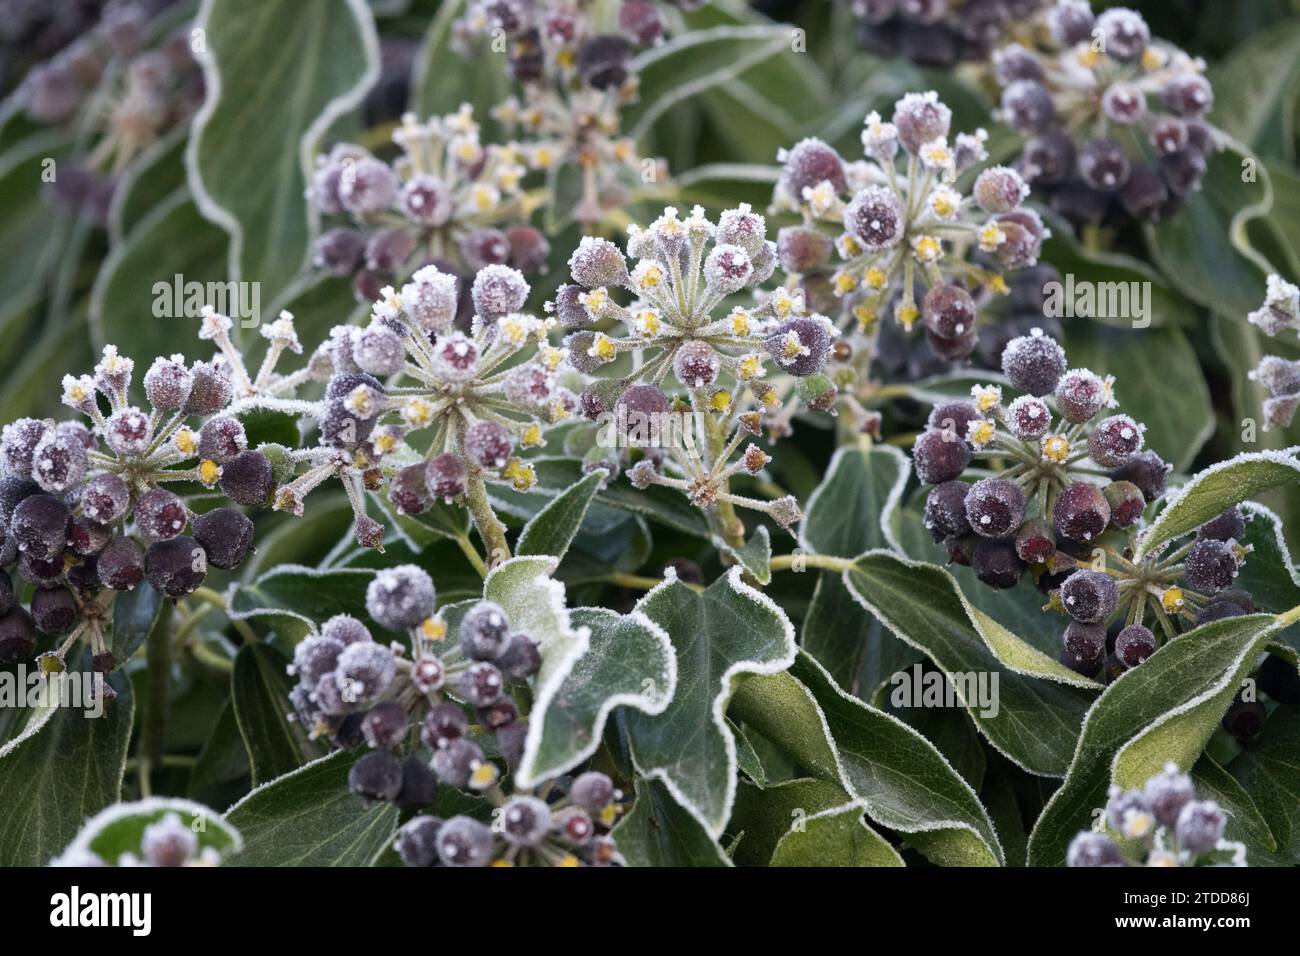 Common ivy, Berries, winter, frosted leaves, Shrub, frost, fruits, frosty leaves, Seed heads, Hedera helix Stock Photo